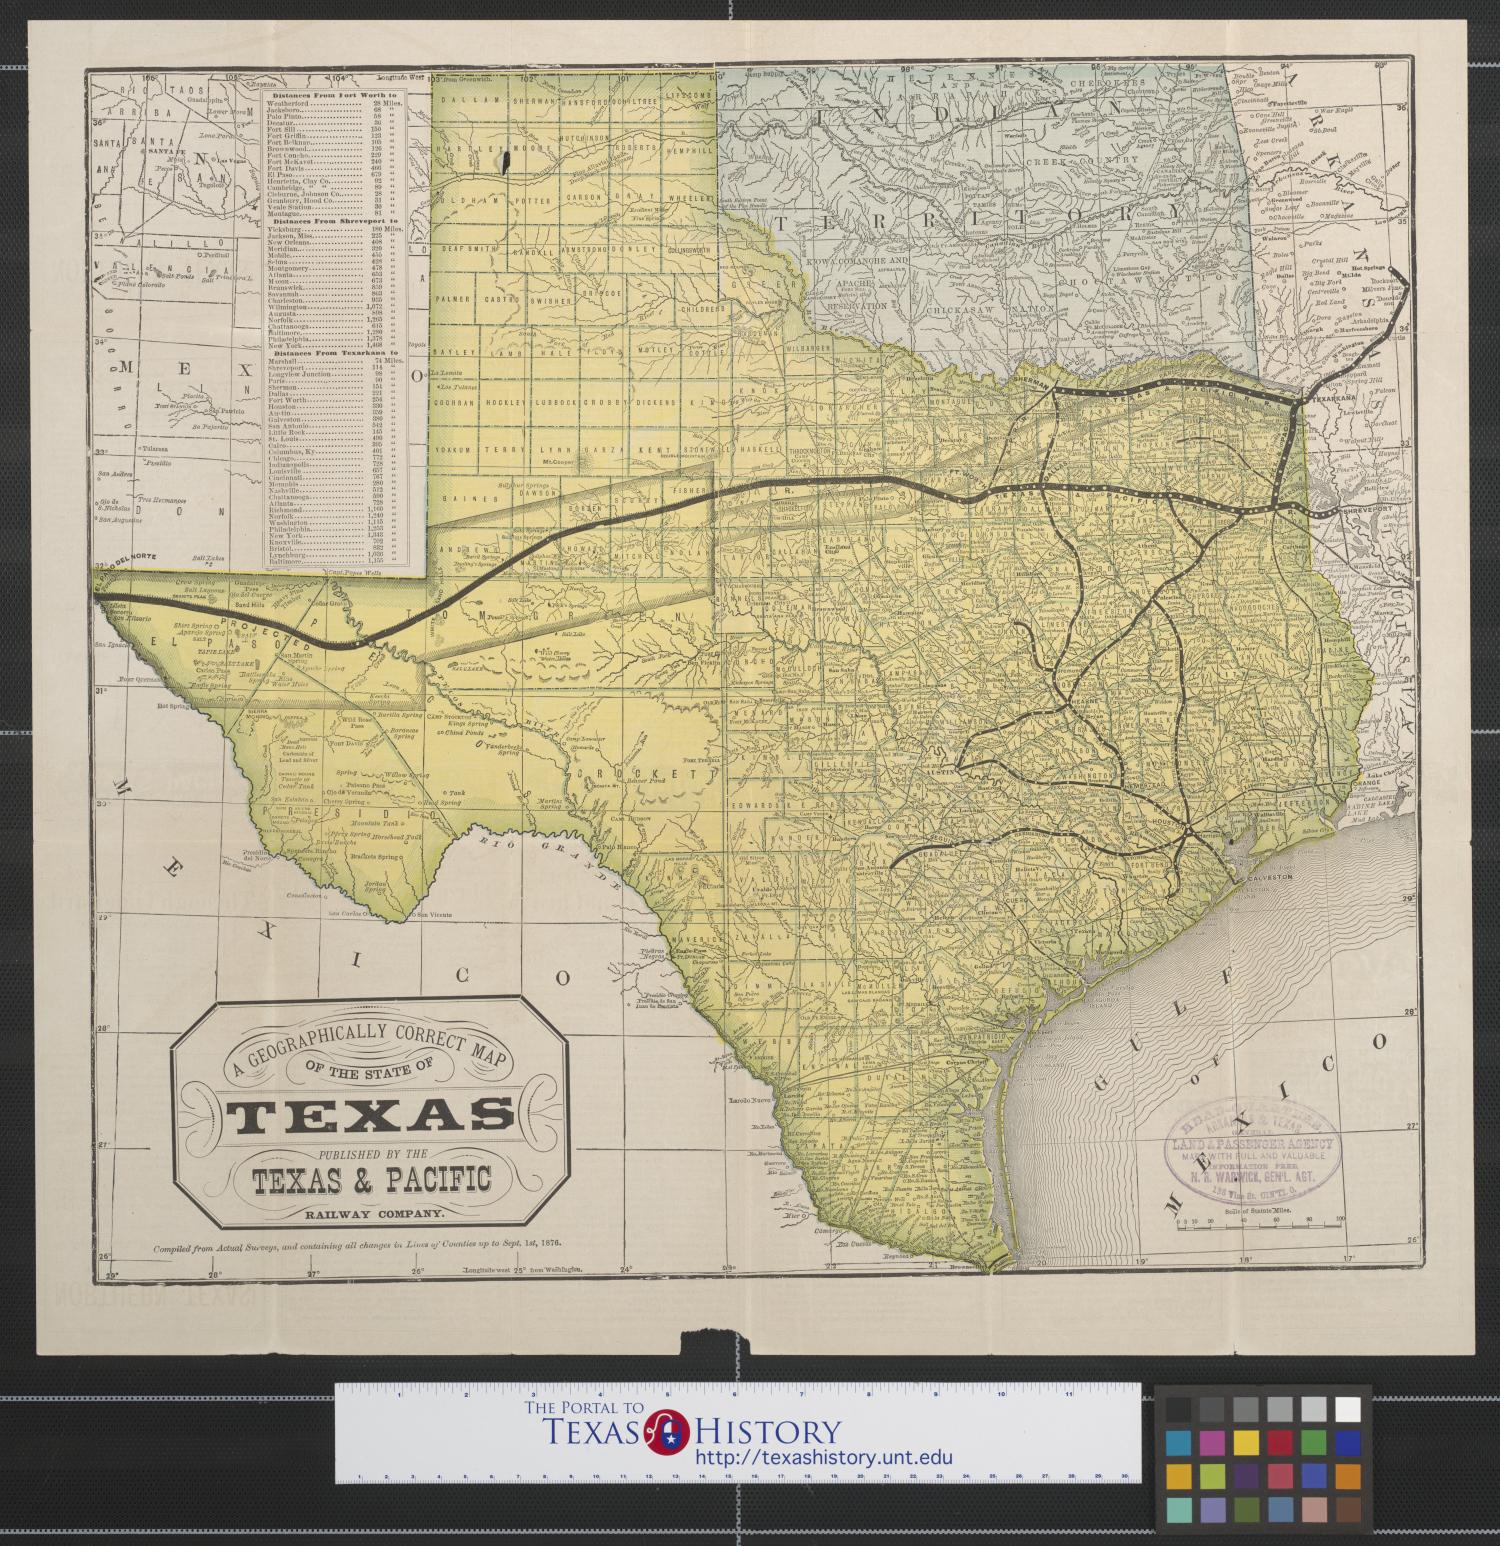 A geographically correct map of the State of Texas: Compiled from actual surveys, and containing all changes in lines of counties up to Sept. 1st, 1876.
                                                
                                                    [Sequence #]: 1 of 2
                                                